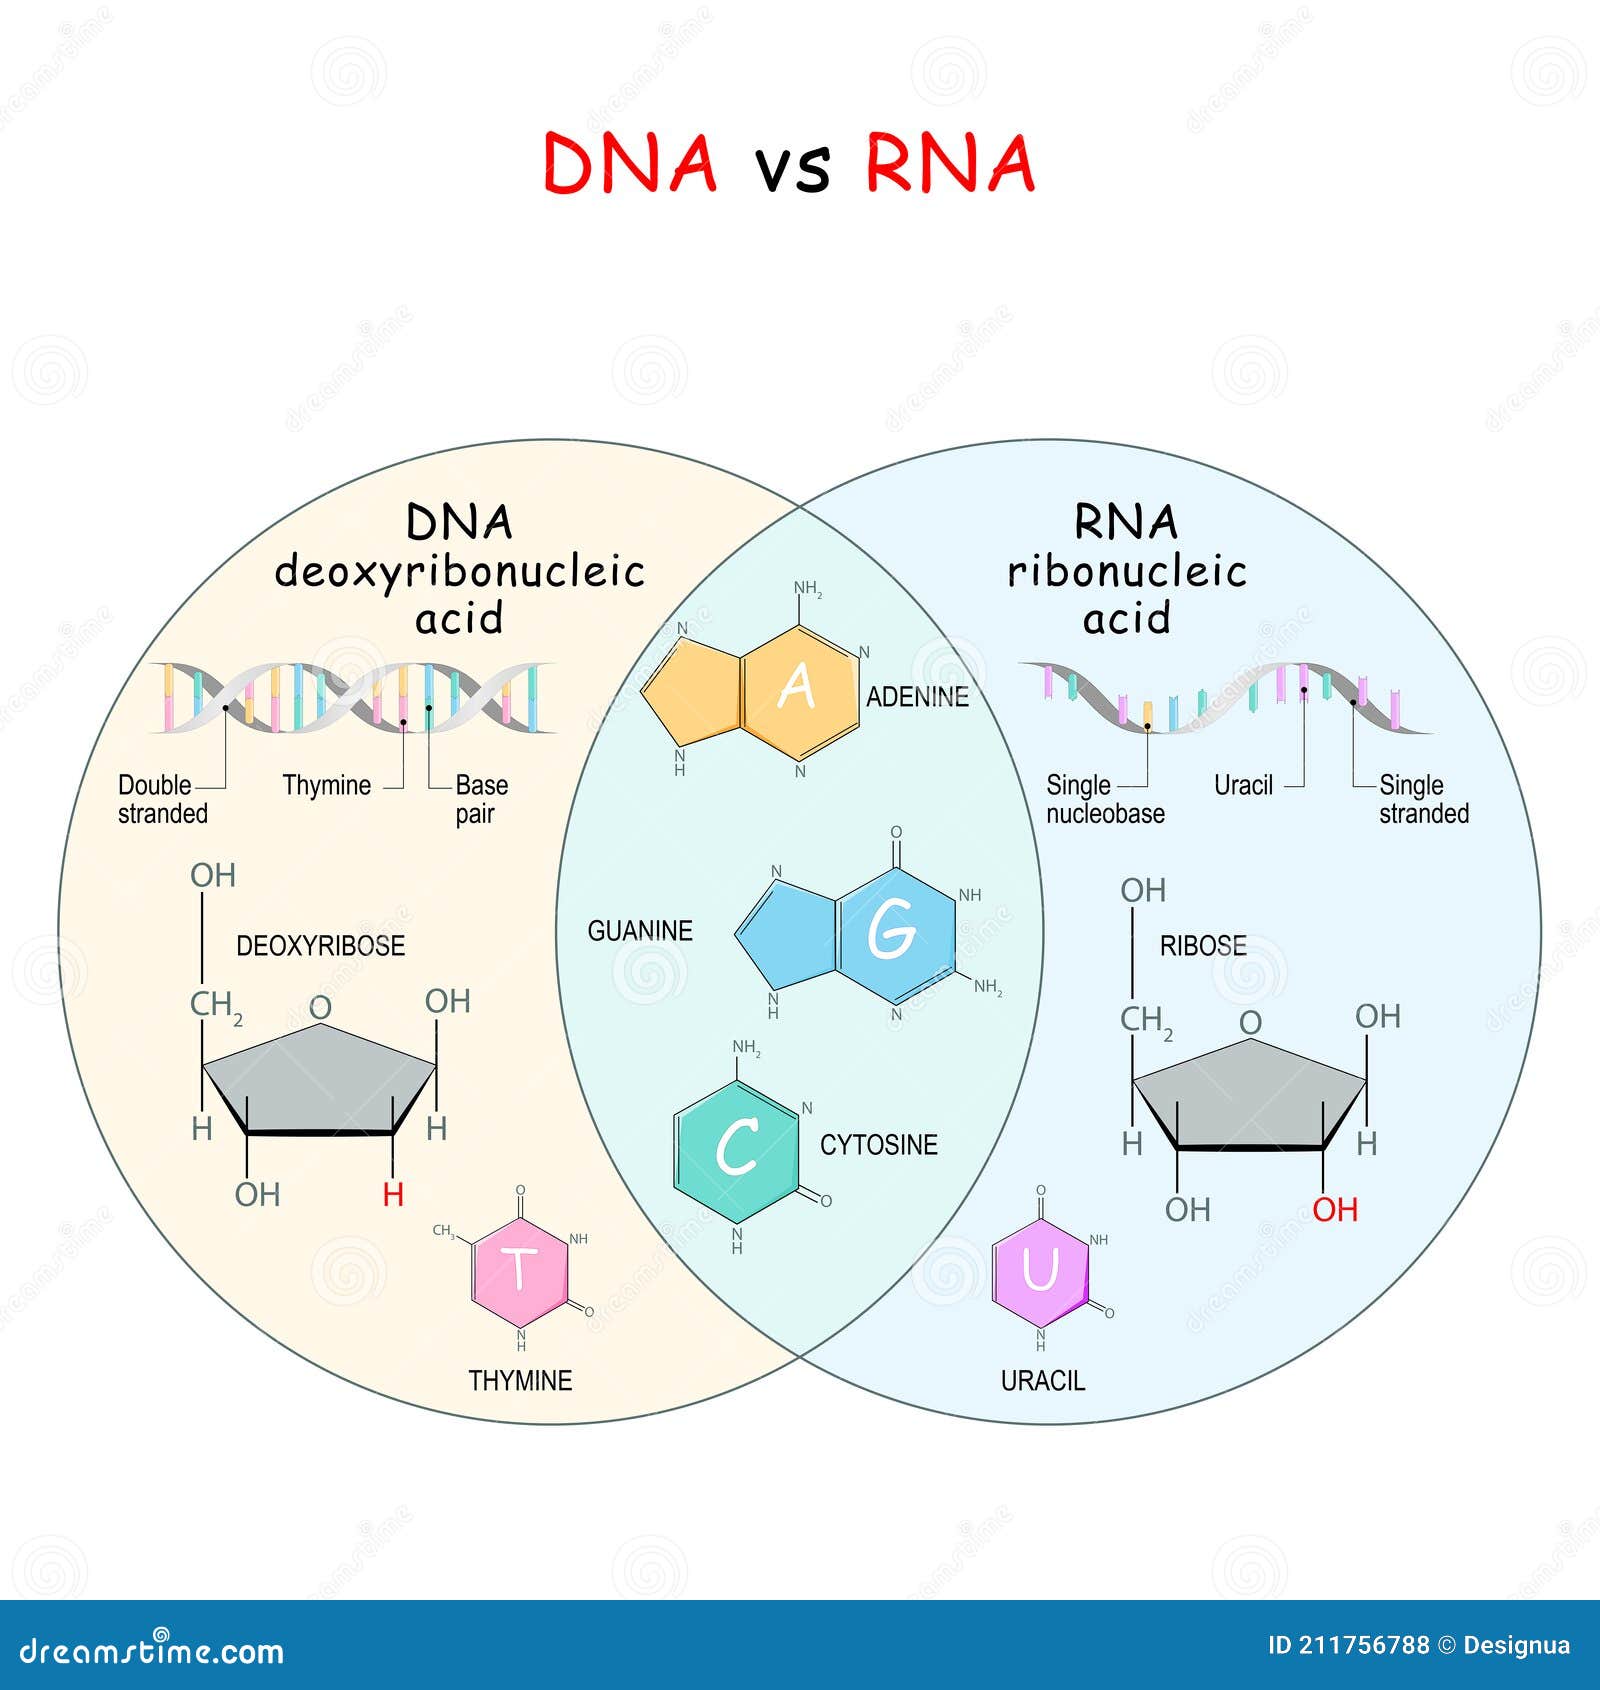 dna and rna. comparison and difference